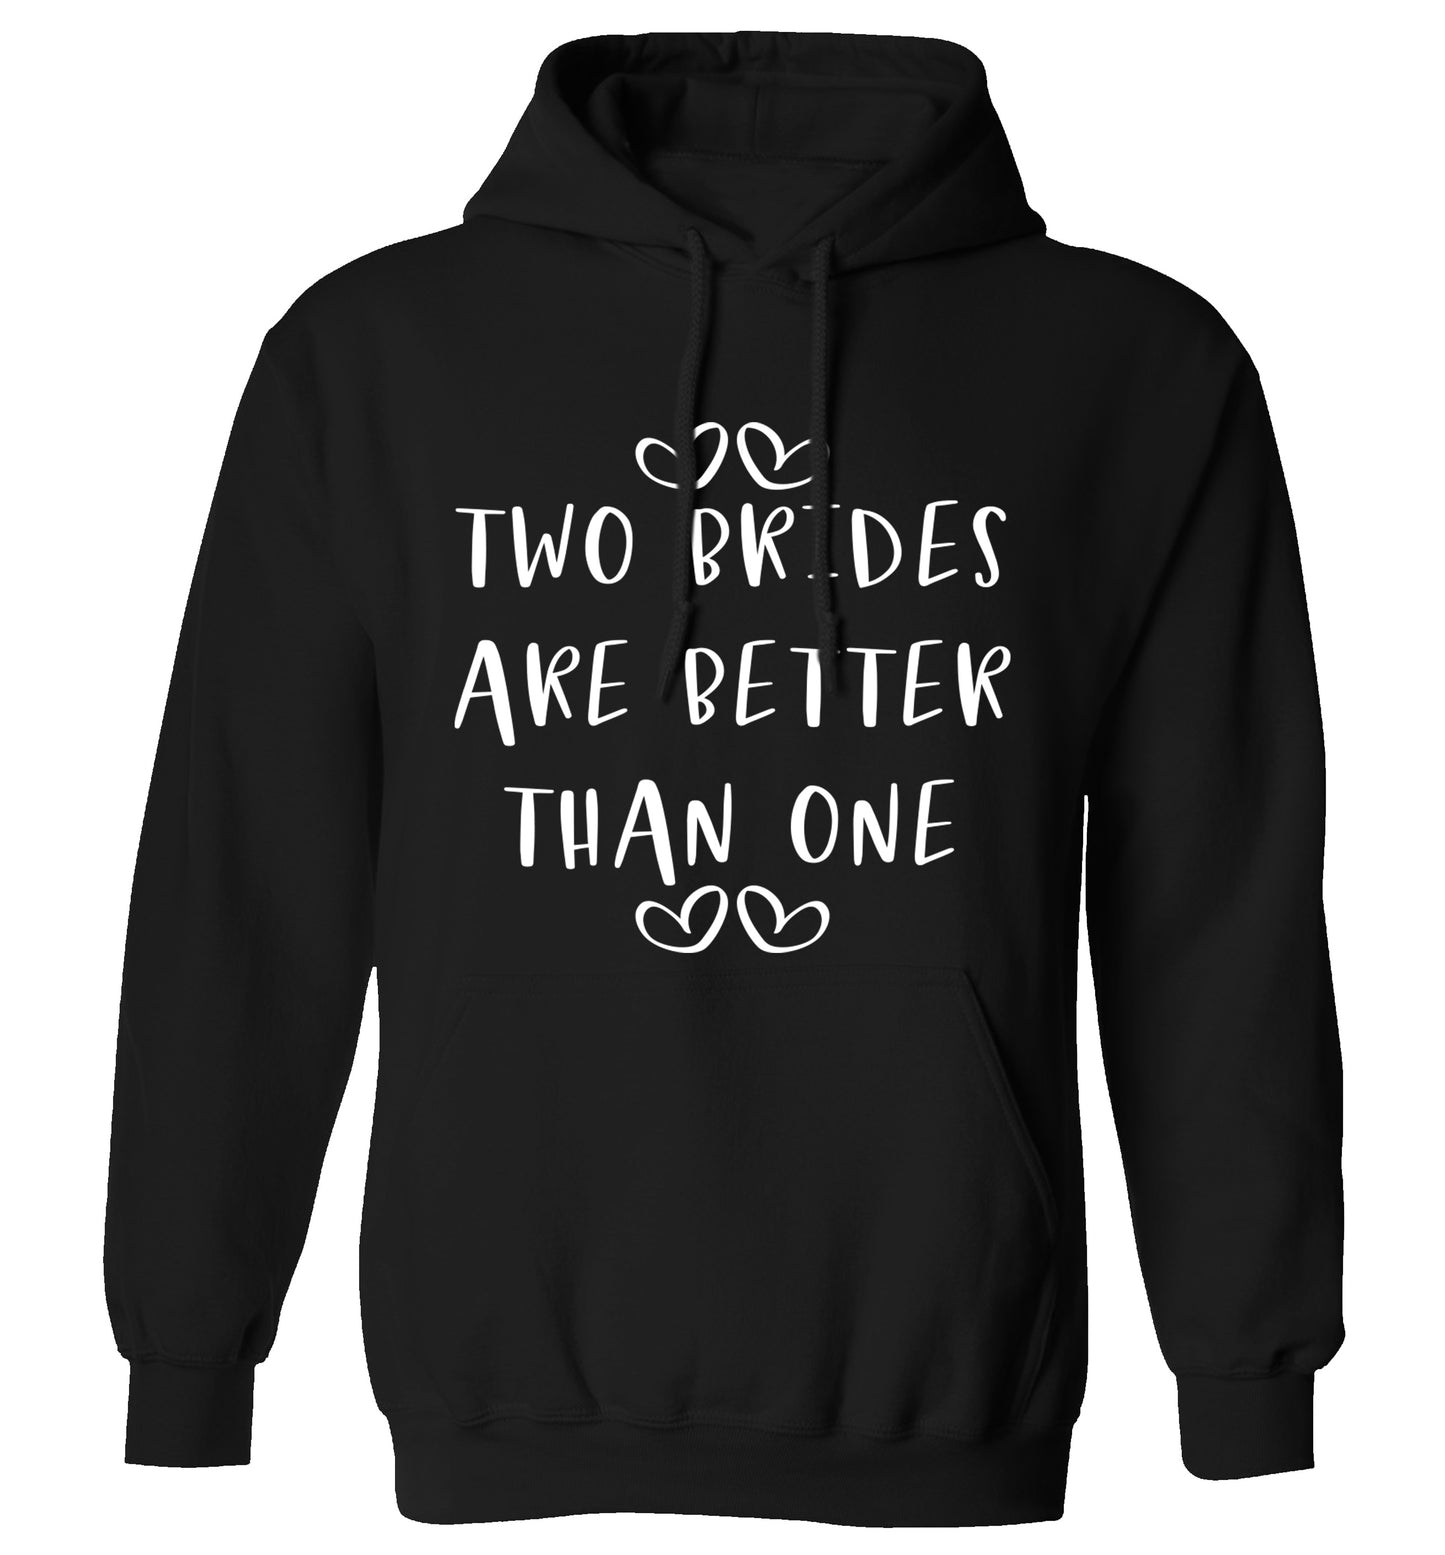 Two brides are better than one adults unisex black hoodie 2XL